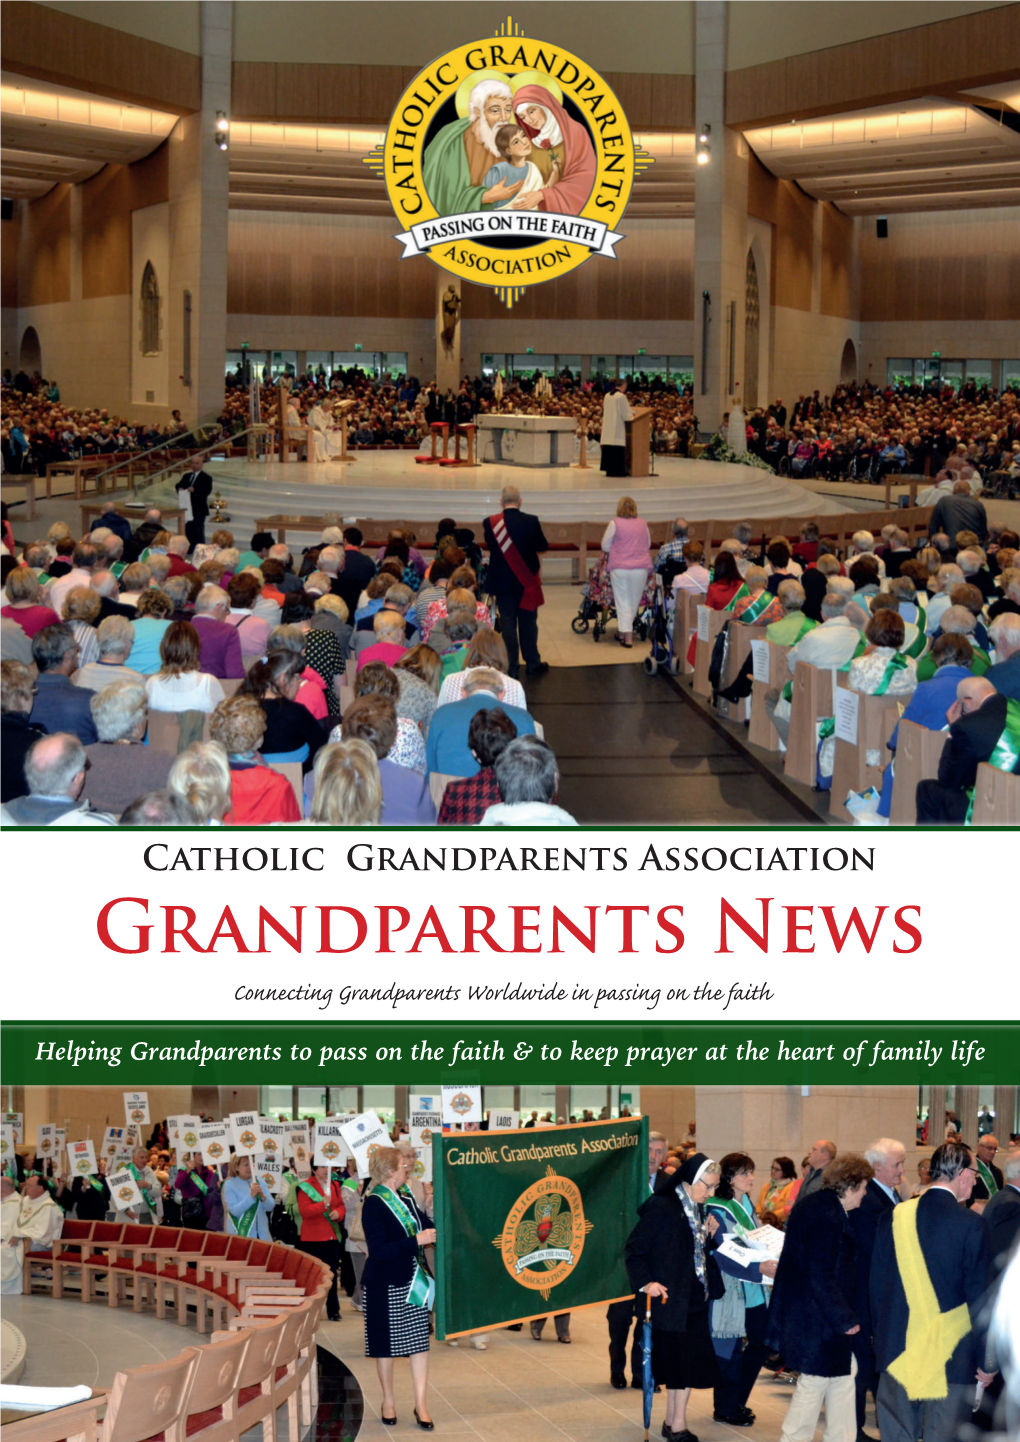 Grandparents News Connecting Grandparents Worldwide in Passing on the Faith